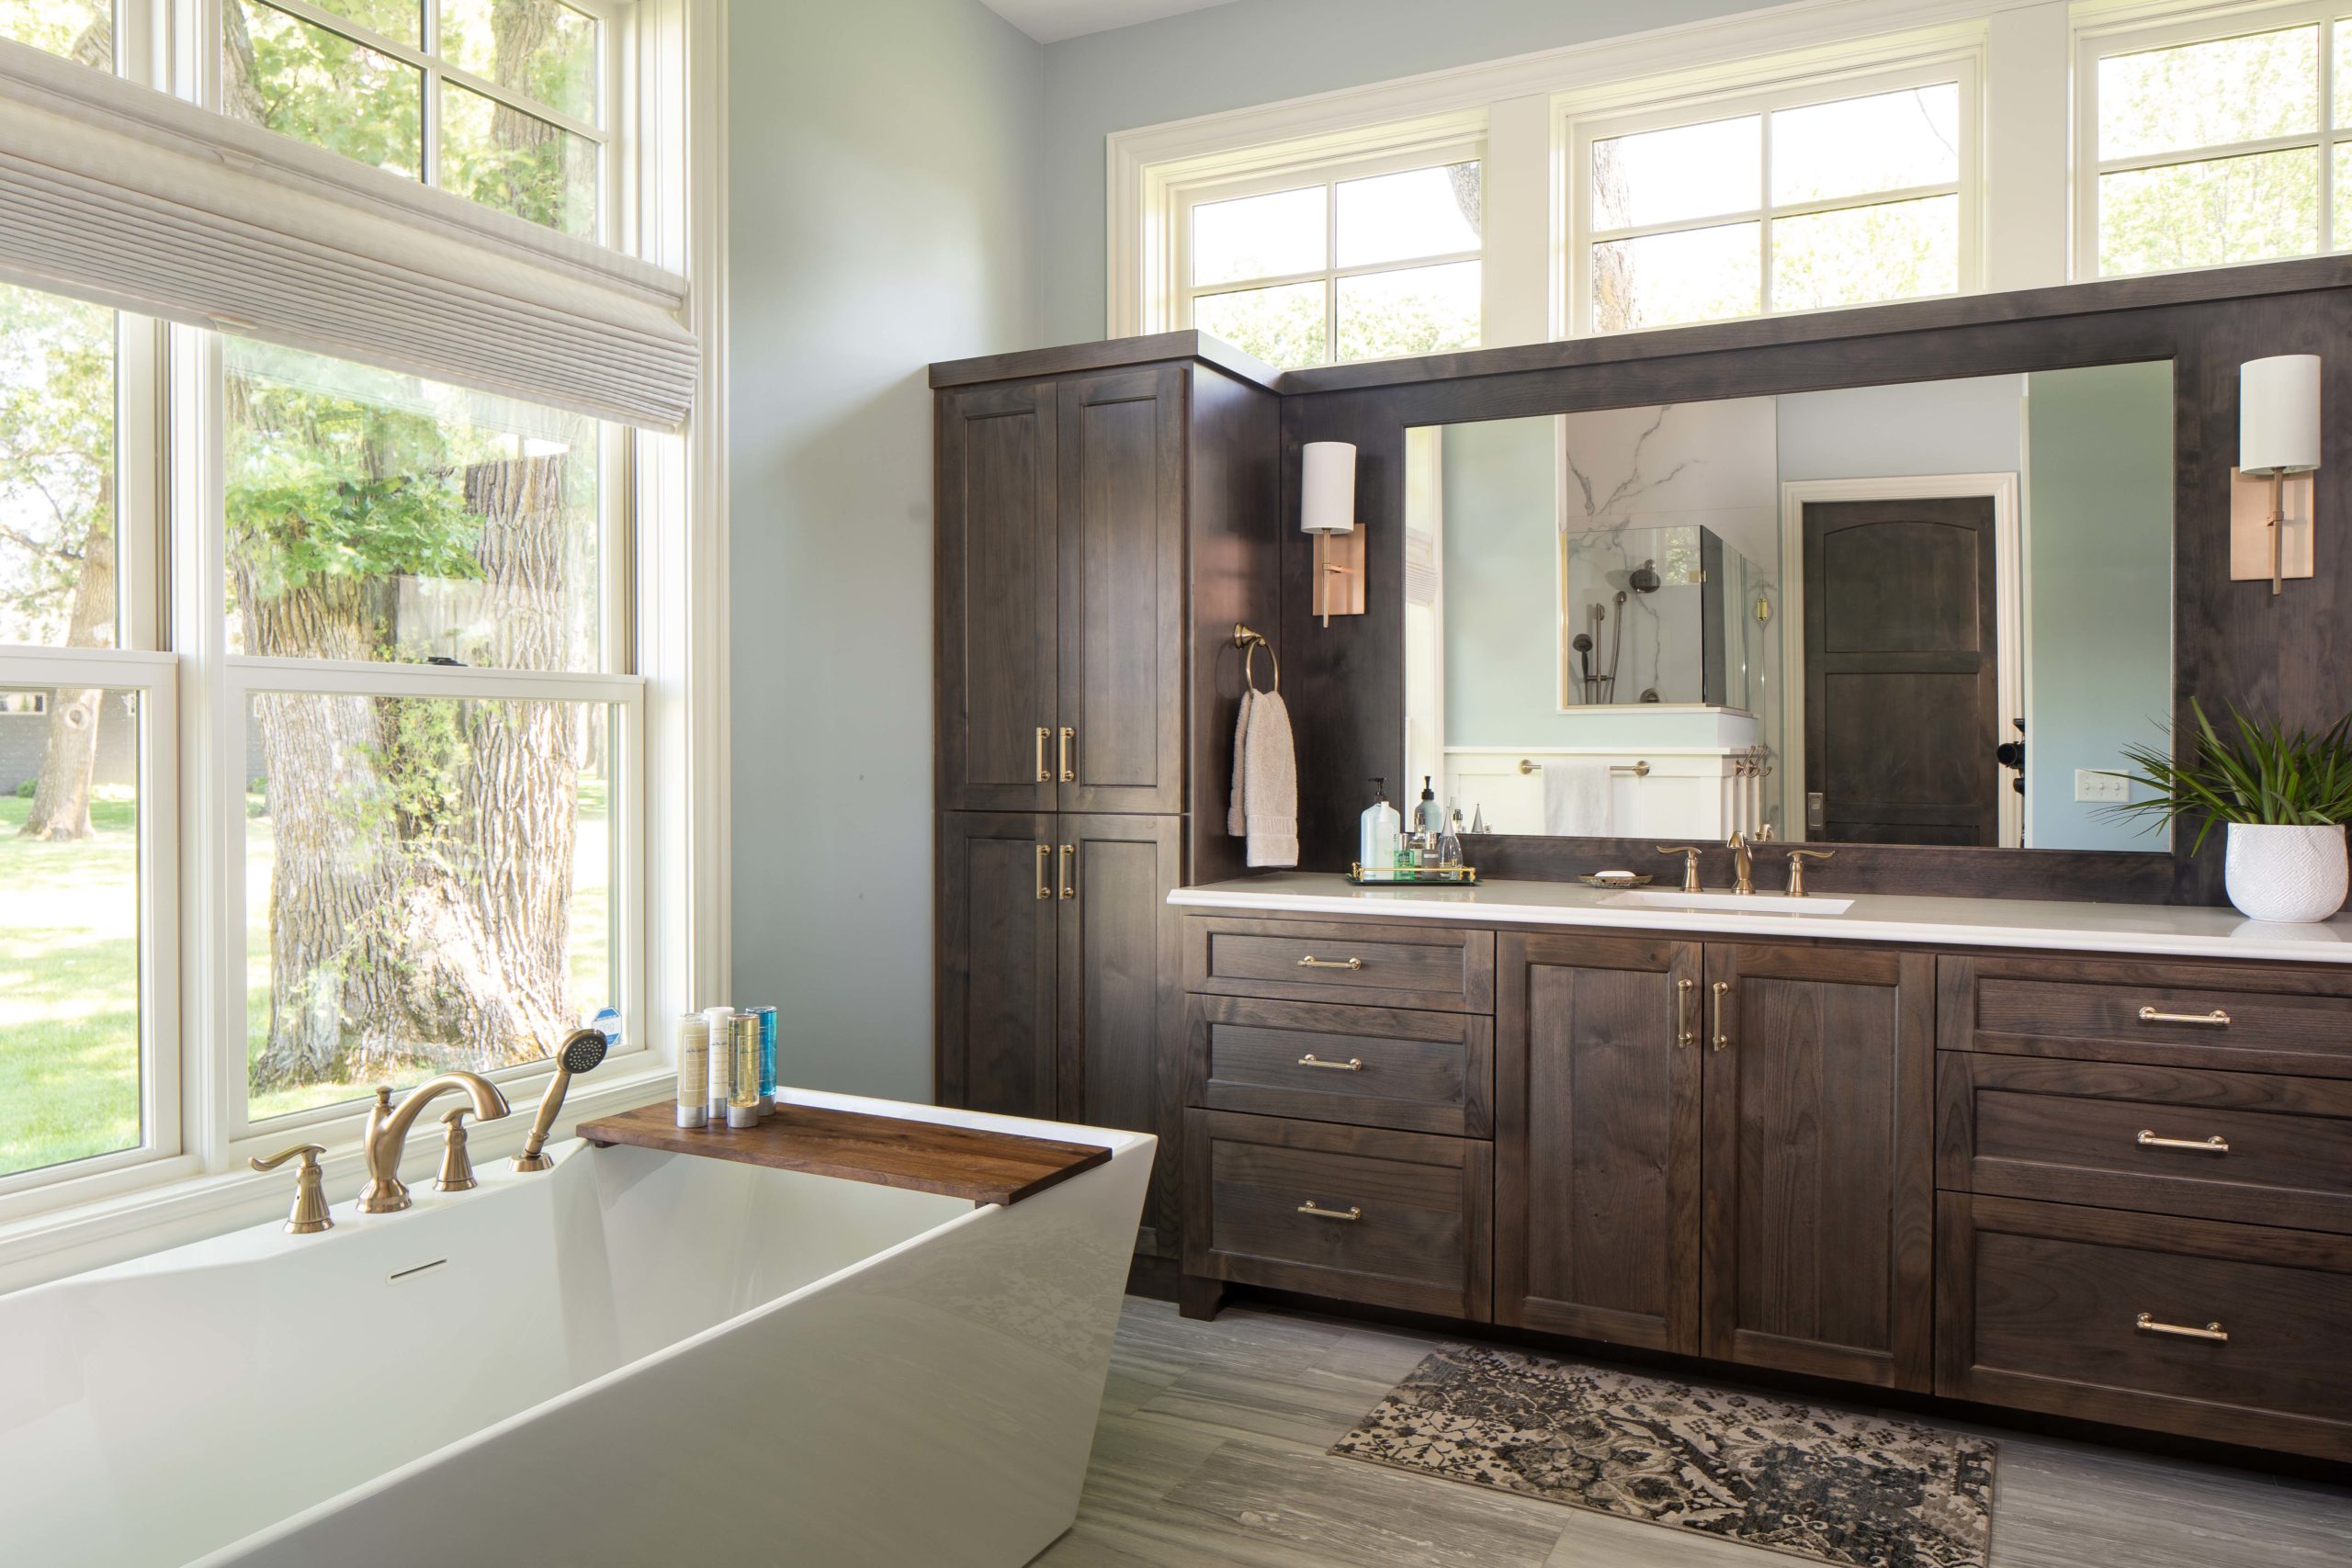 The Lake Escape custom home remodel showcases a bathroom with elegant wooden cabinets and a luxurious tub.